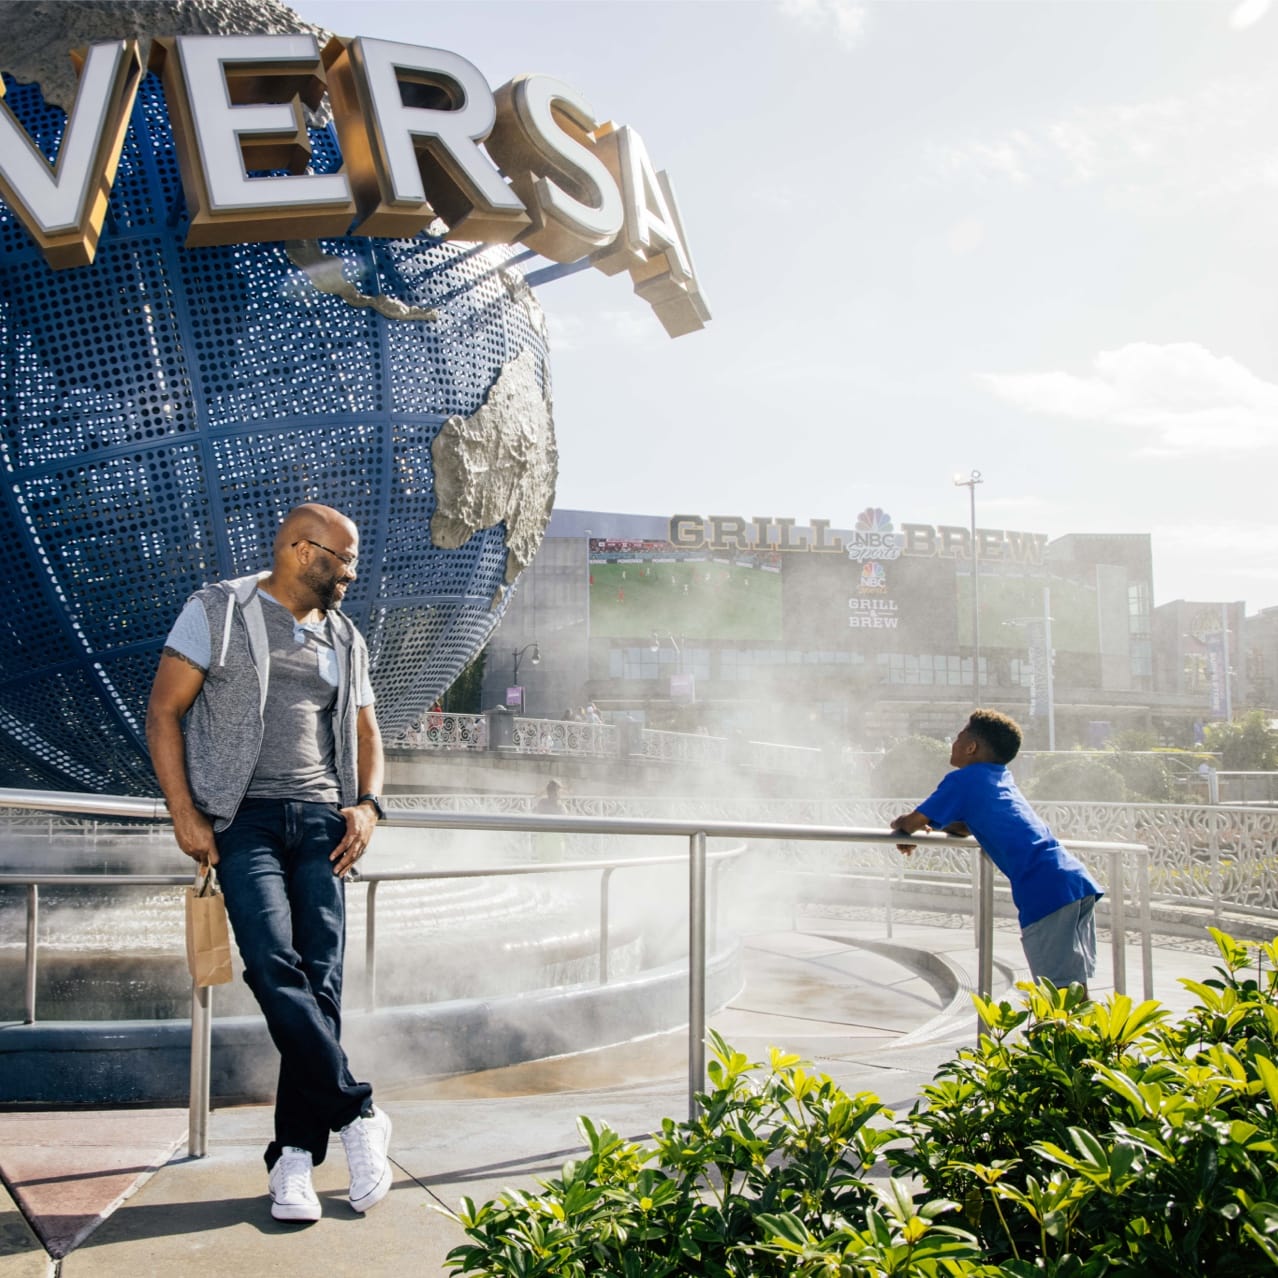 Favorite Things to Do at Universal From a Travel Planner